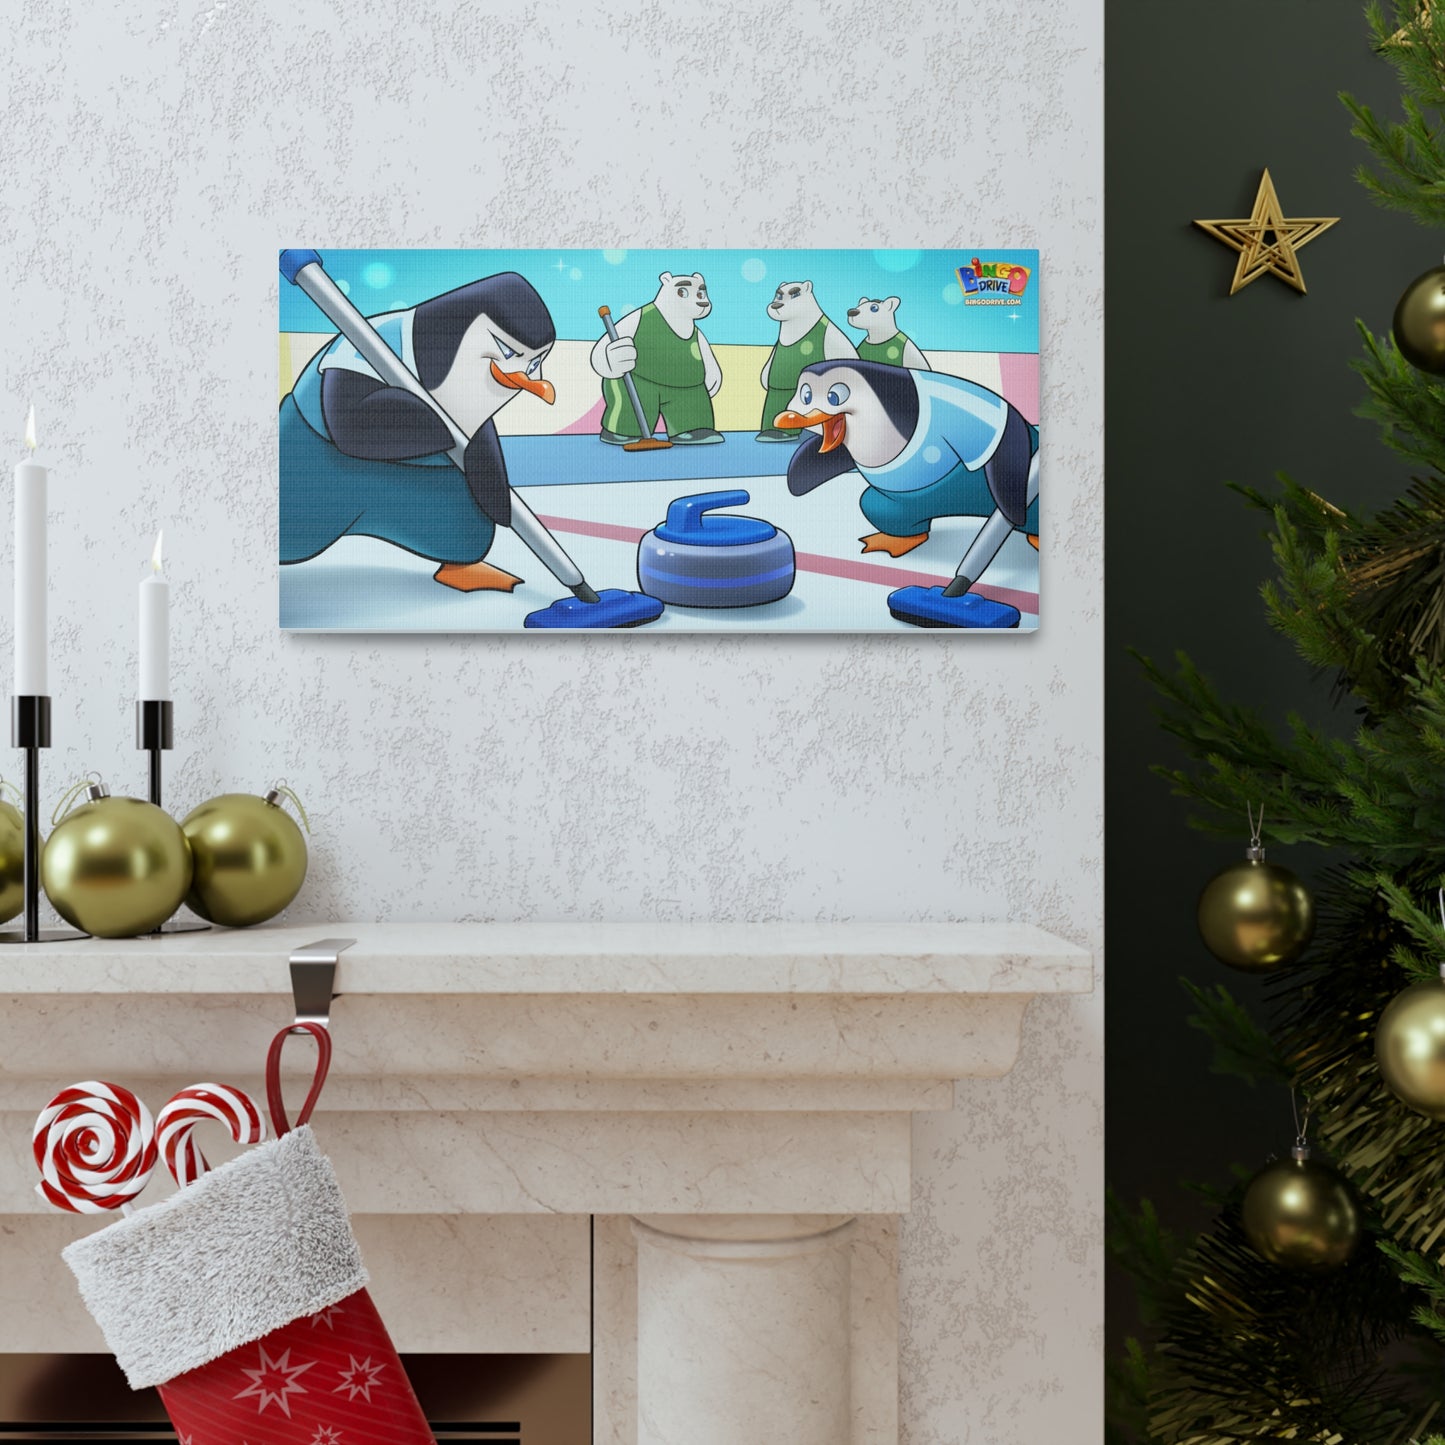 Curling Match - Canvas Gallery Wraps